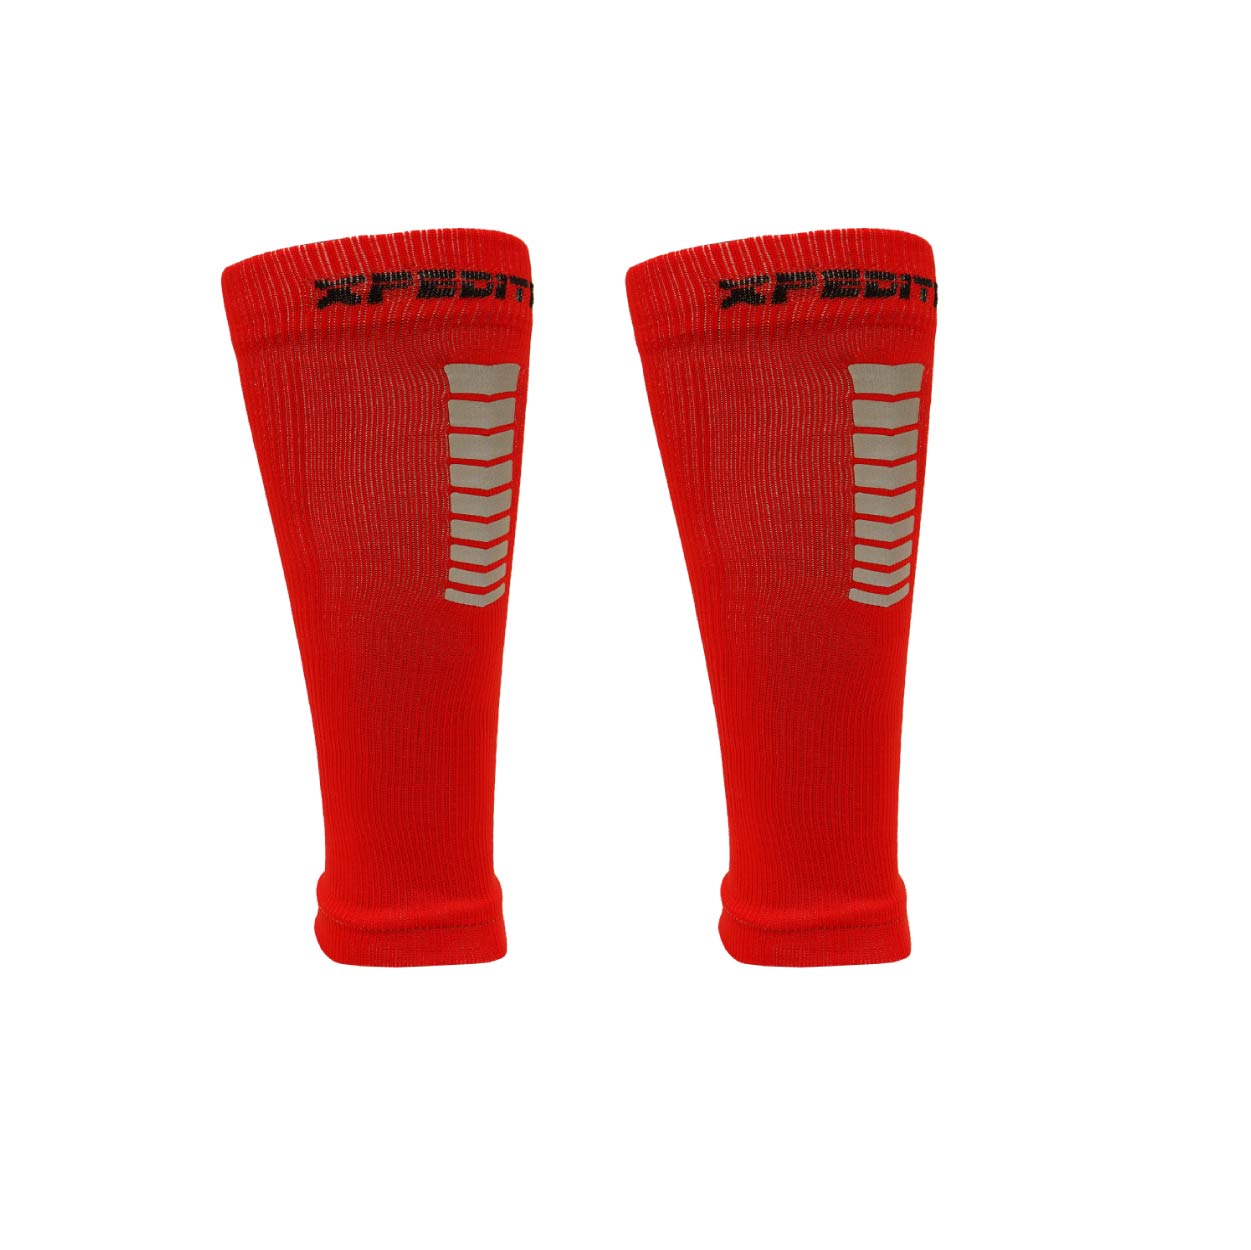 The V12 Pro Compression Pants - compression therapy system for fresh legs